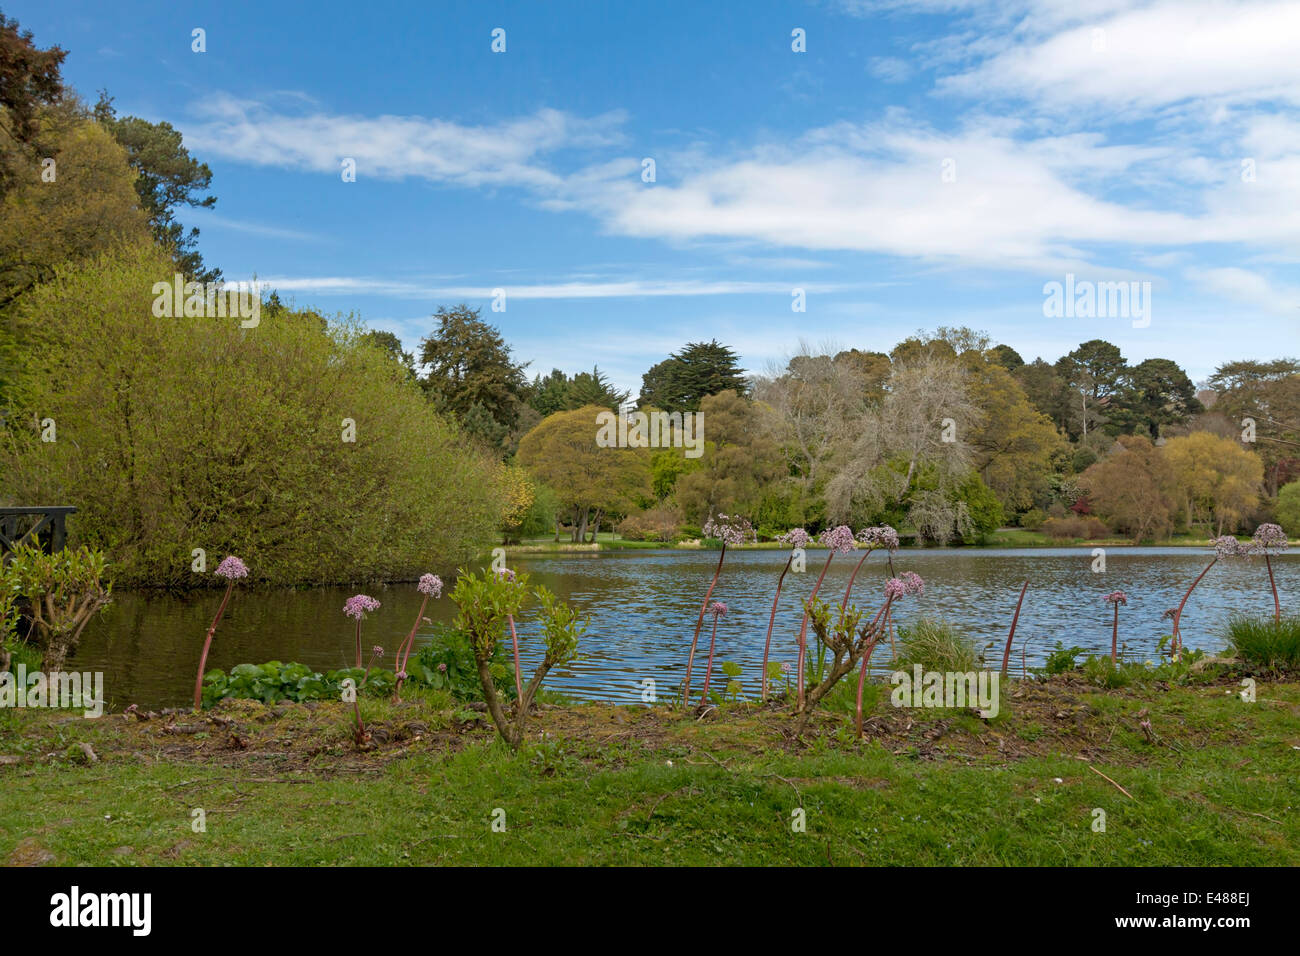 View on Mount Stewart - Lake & Garden, nominated as a UNESCO World Heritage Site, County Down, Northern Ireland, United Kingdom. Stock Photo